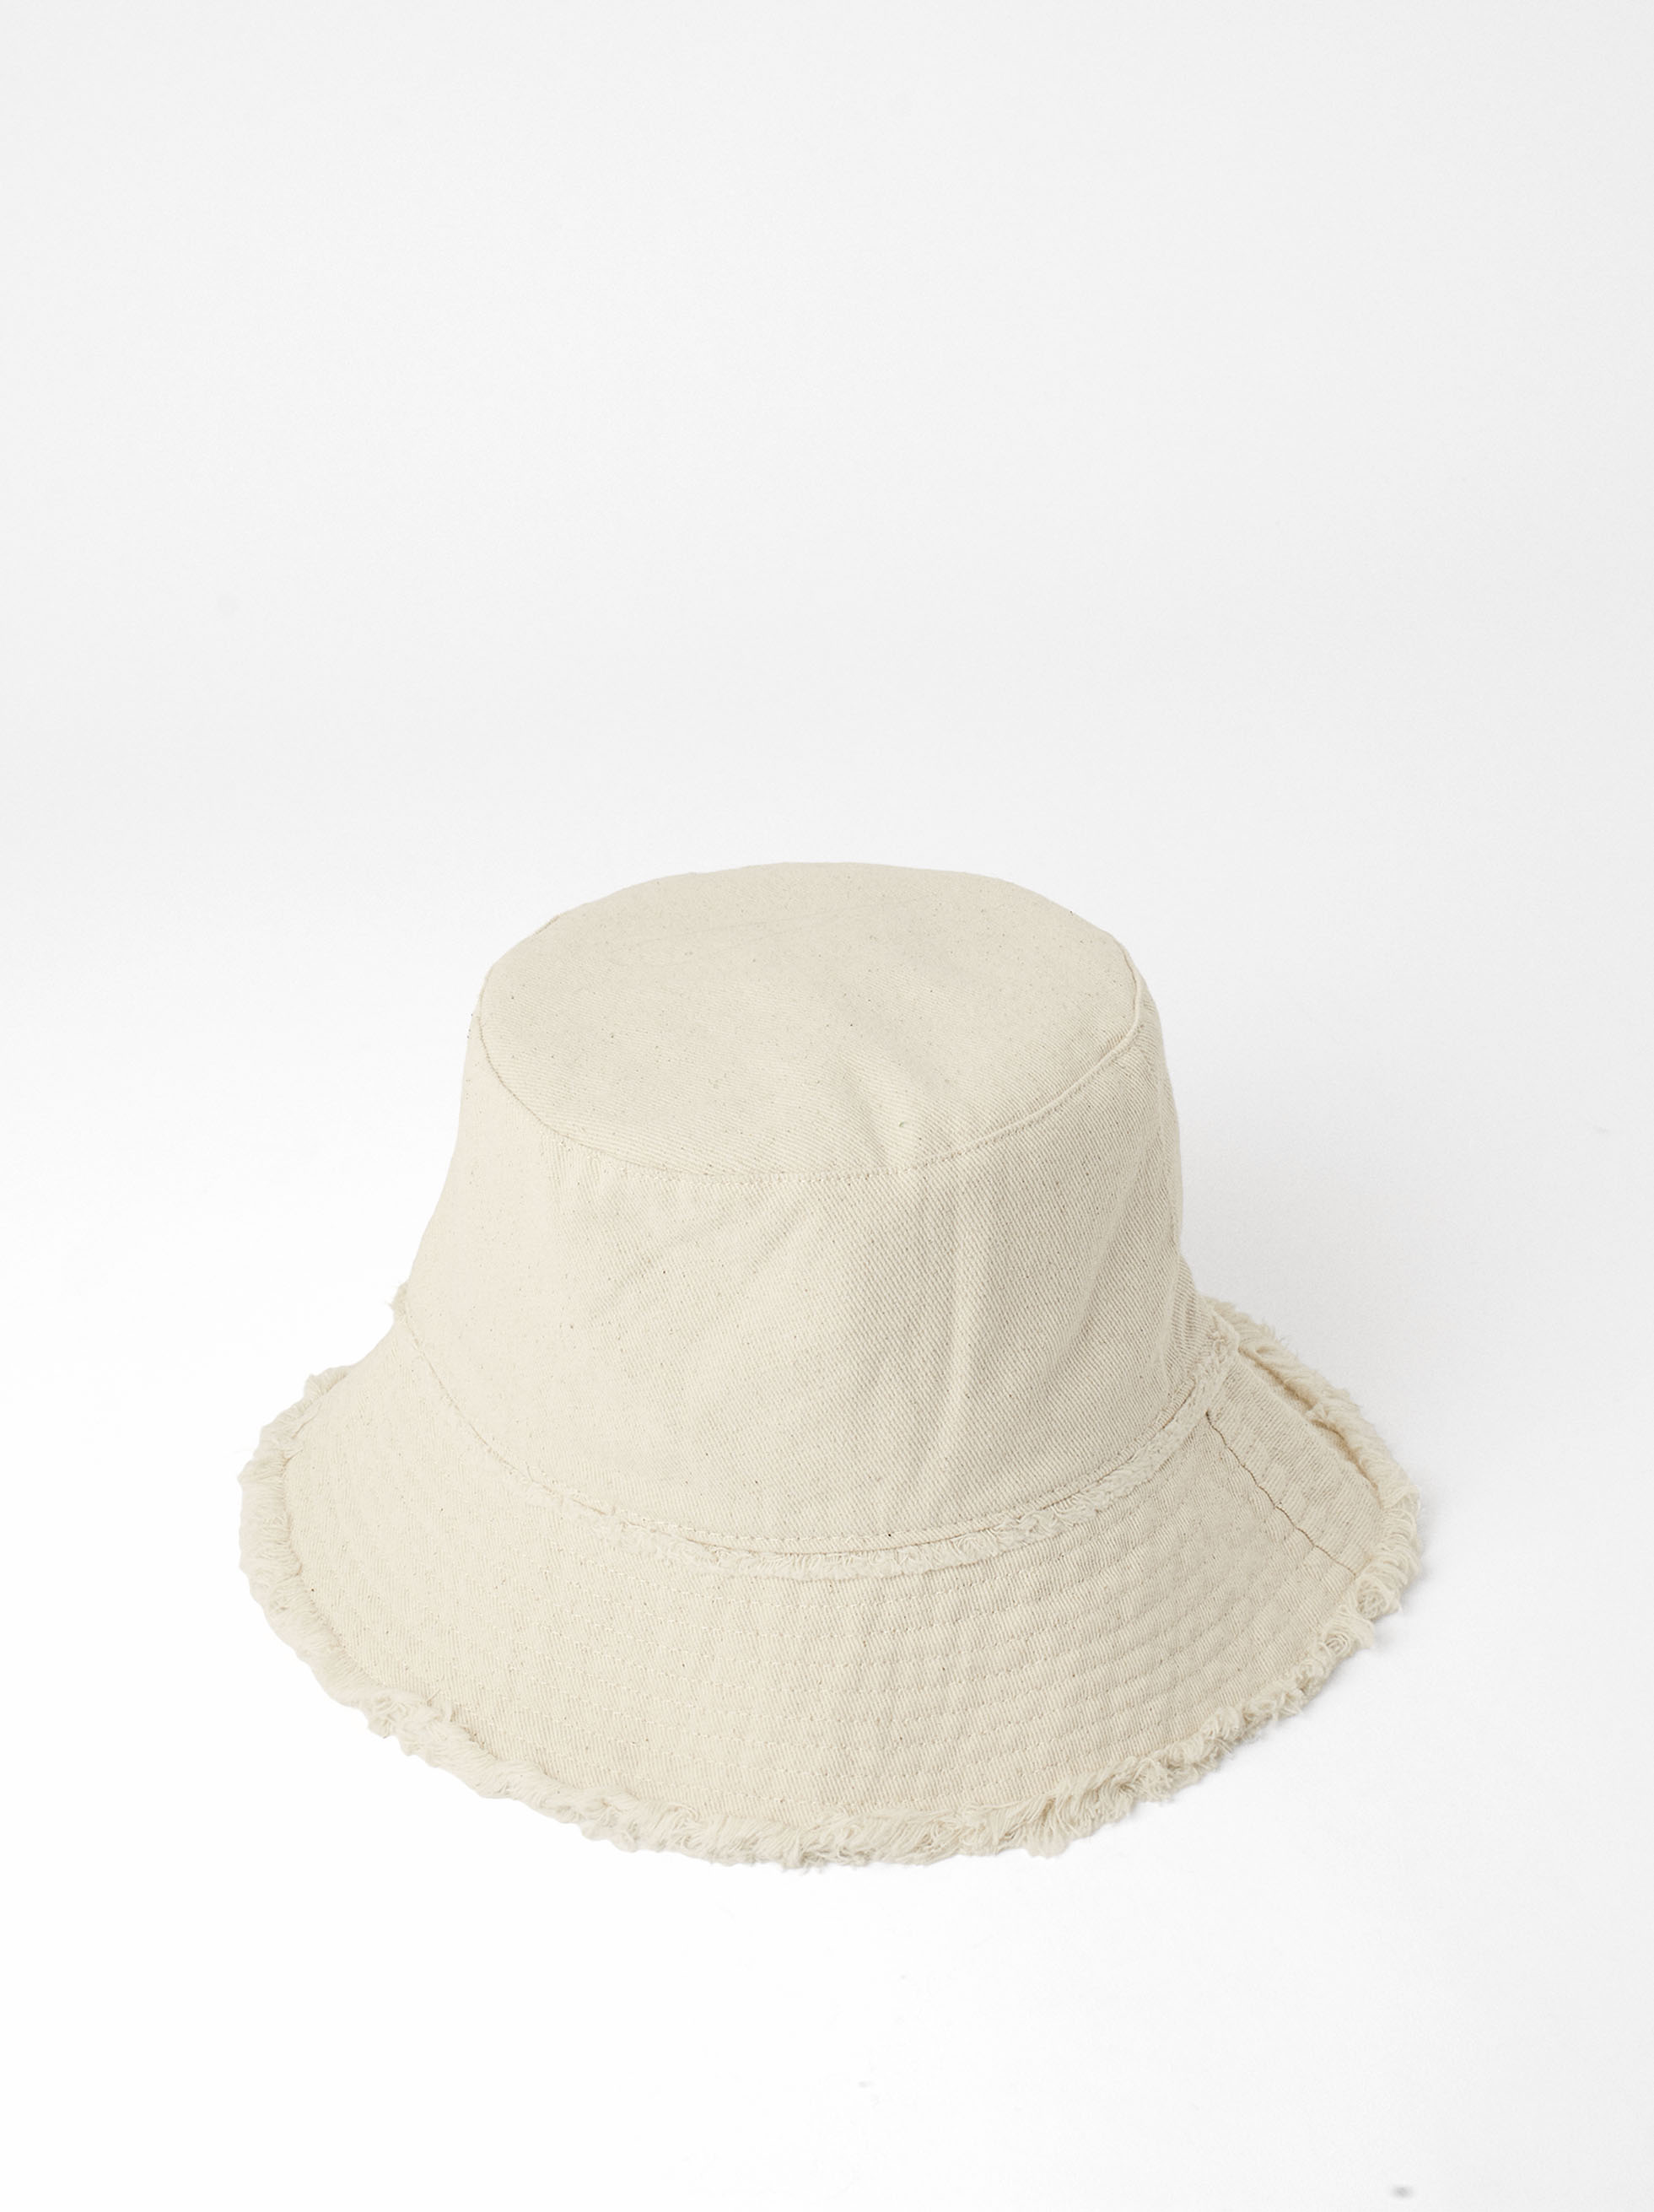 Personalized Bucket Hat image number 2.0